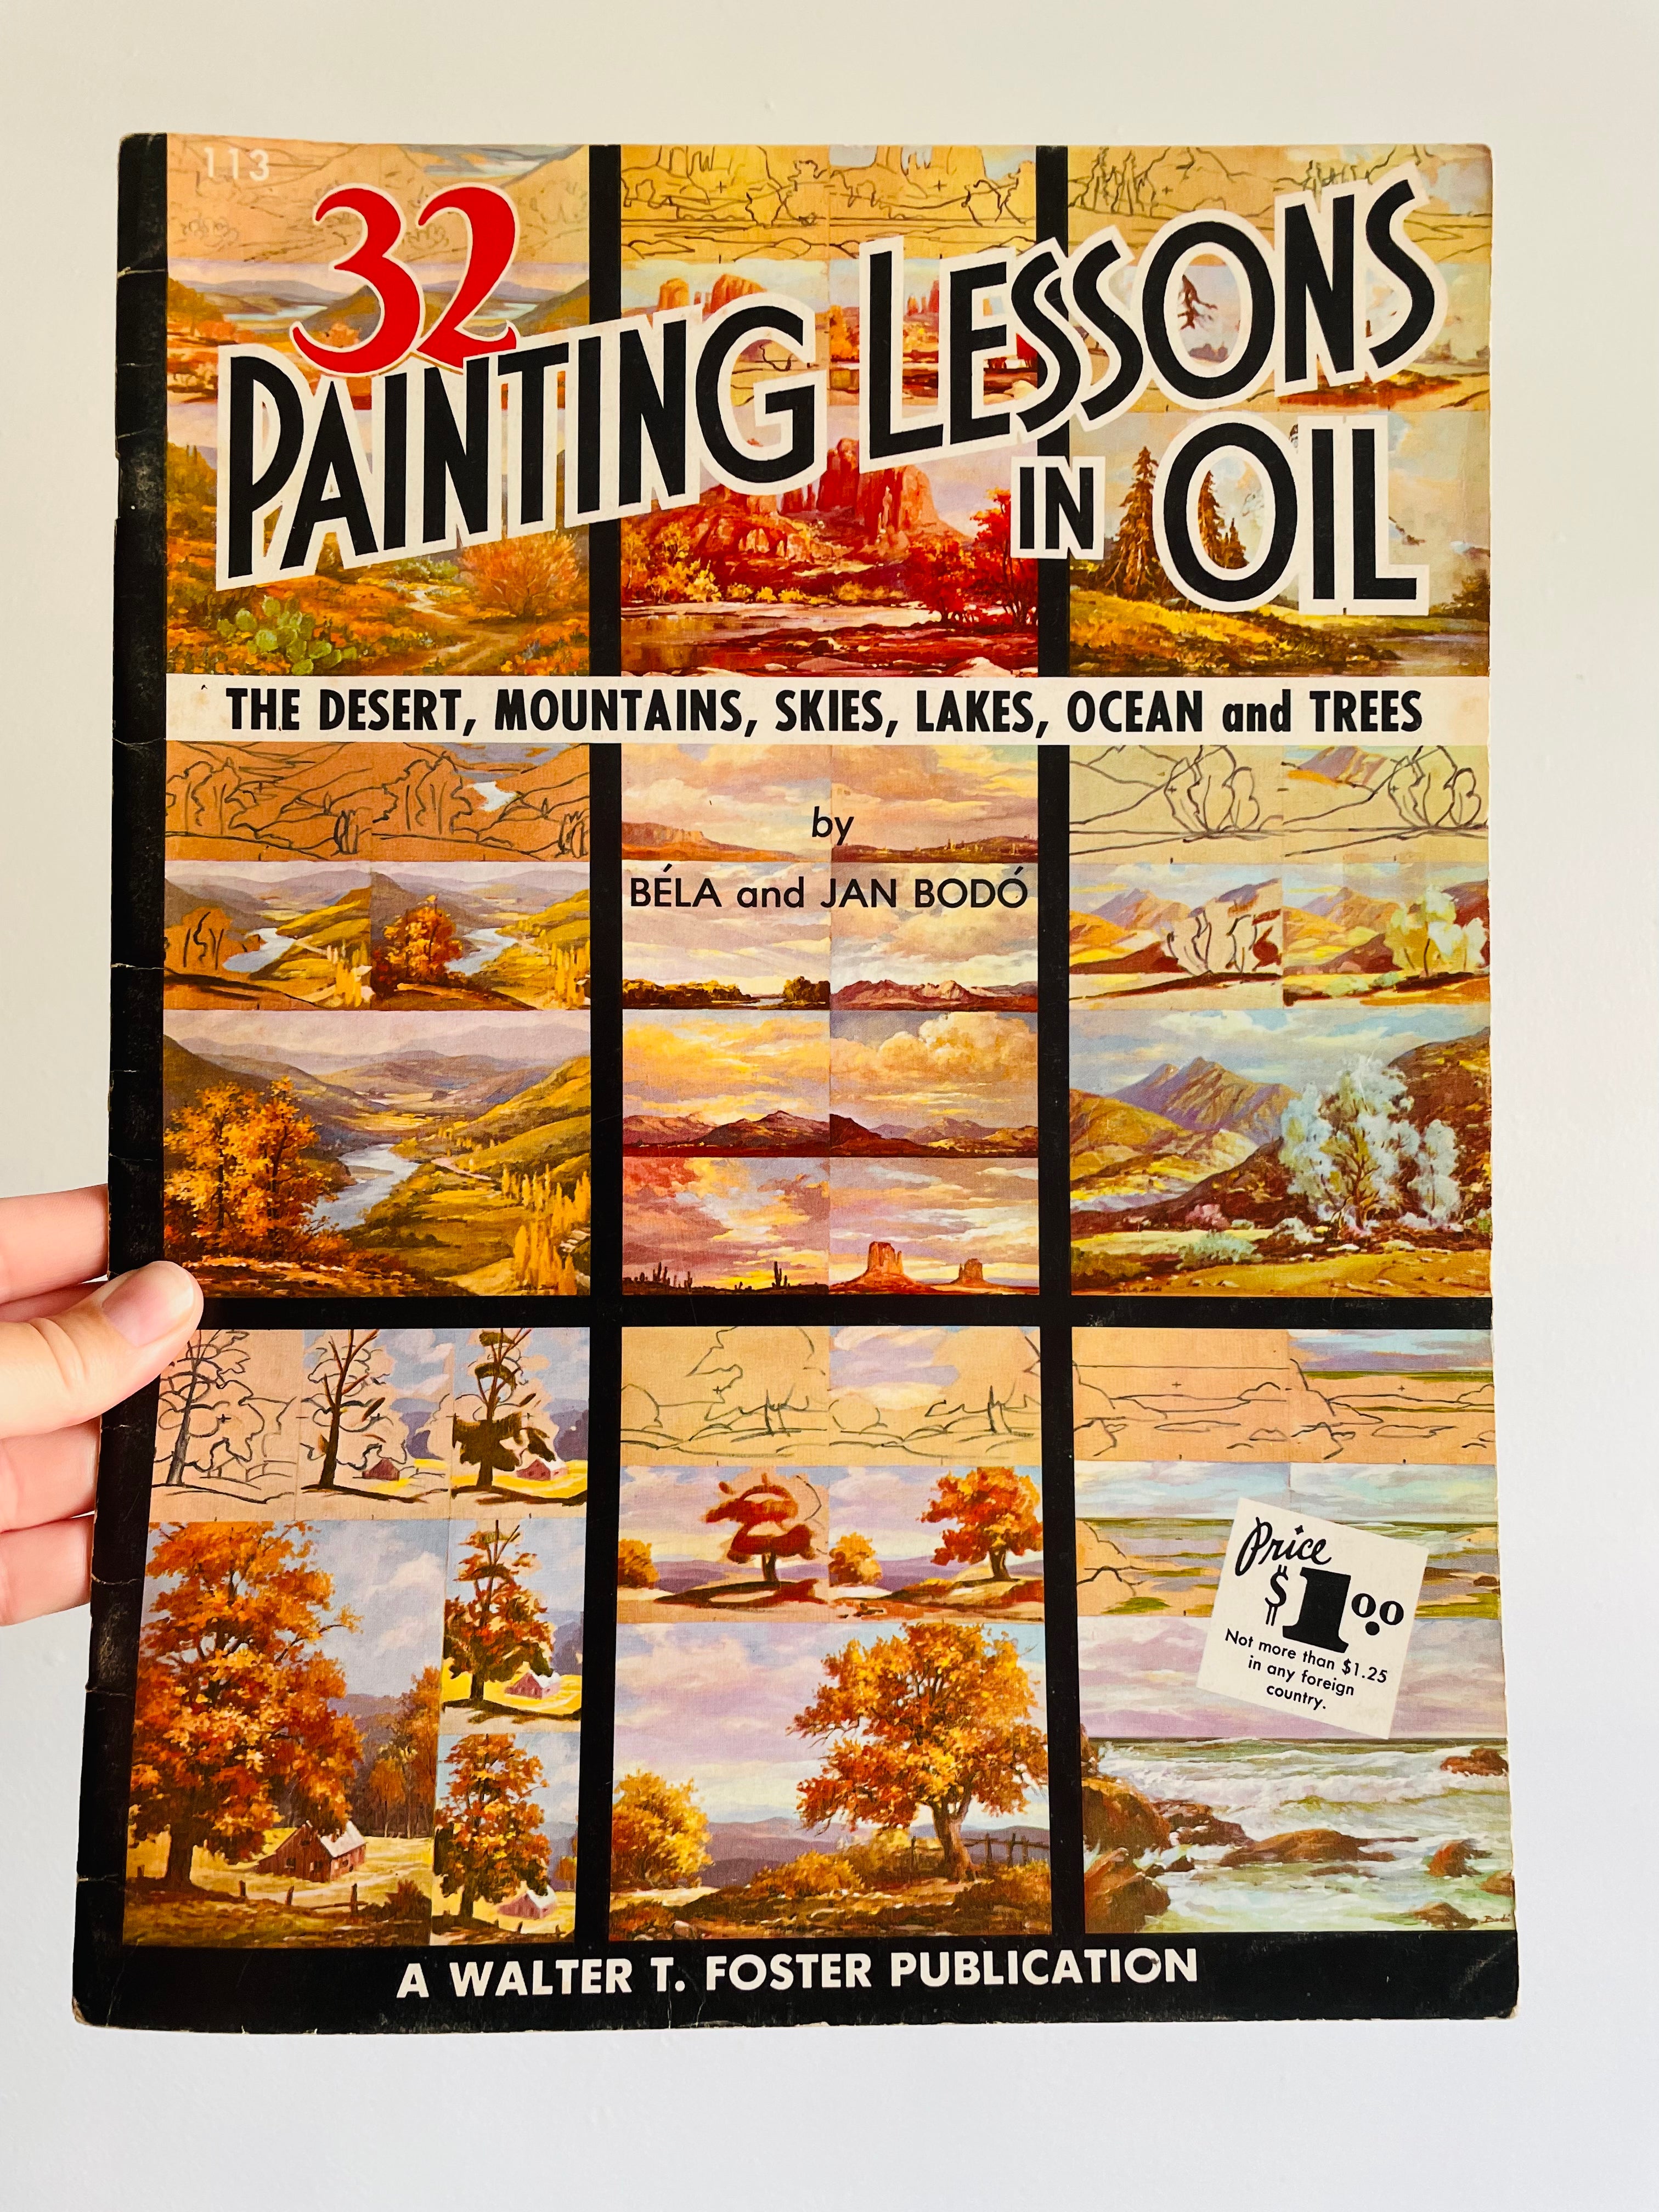 The Magic Of Oil Painting (Walter Foster Art Books, 162): W